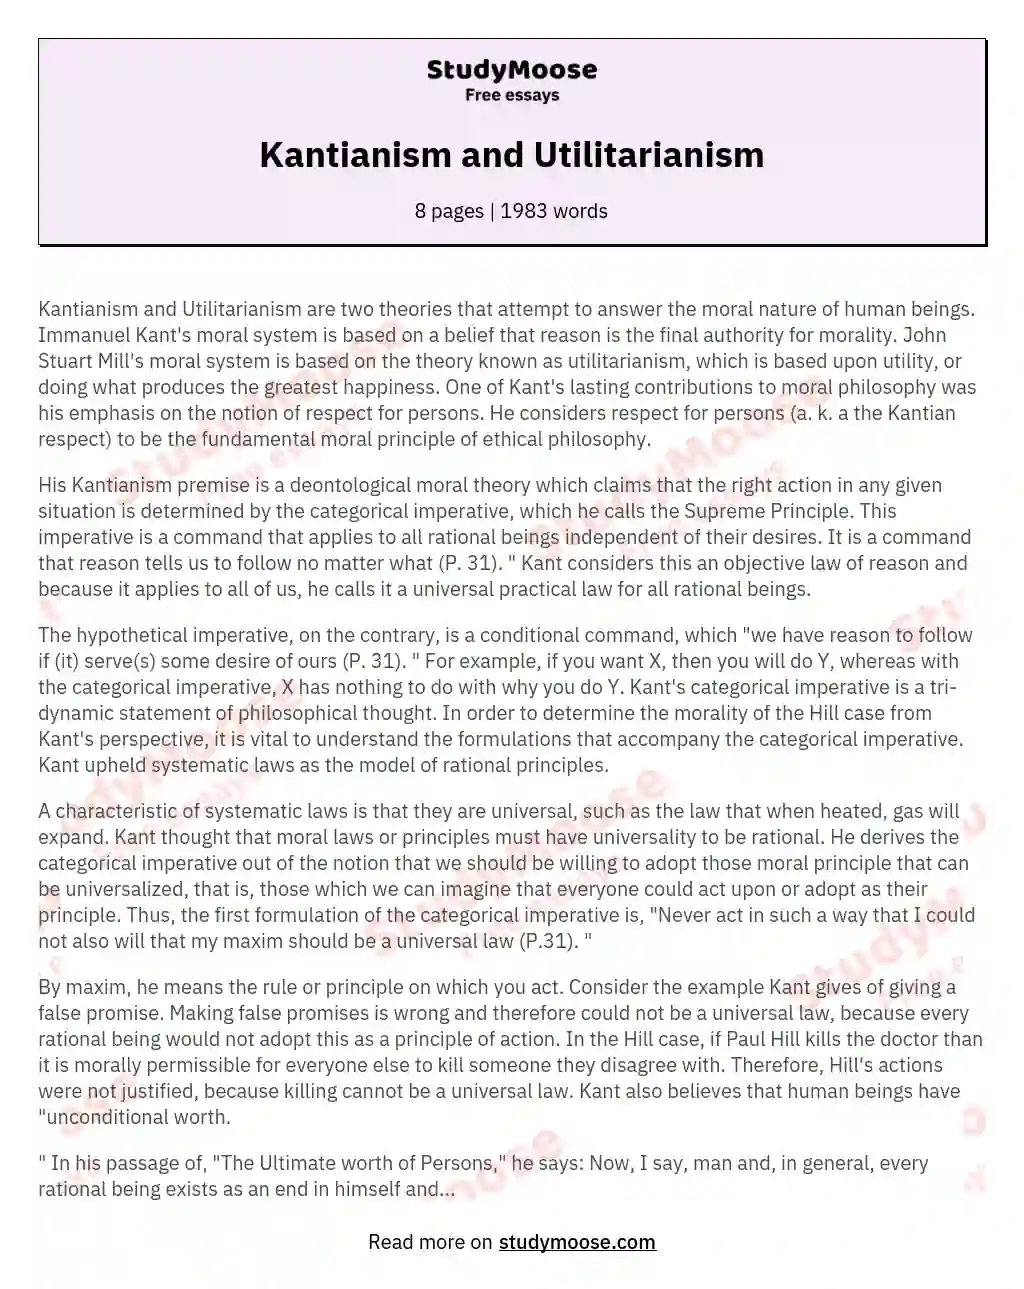 Kantianism and Utilitarianism essay